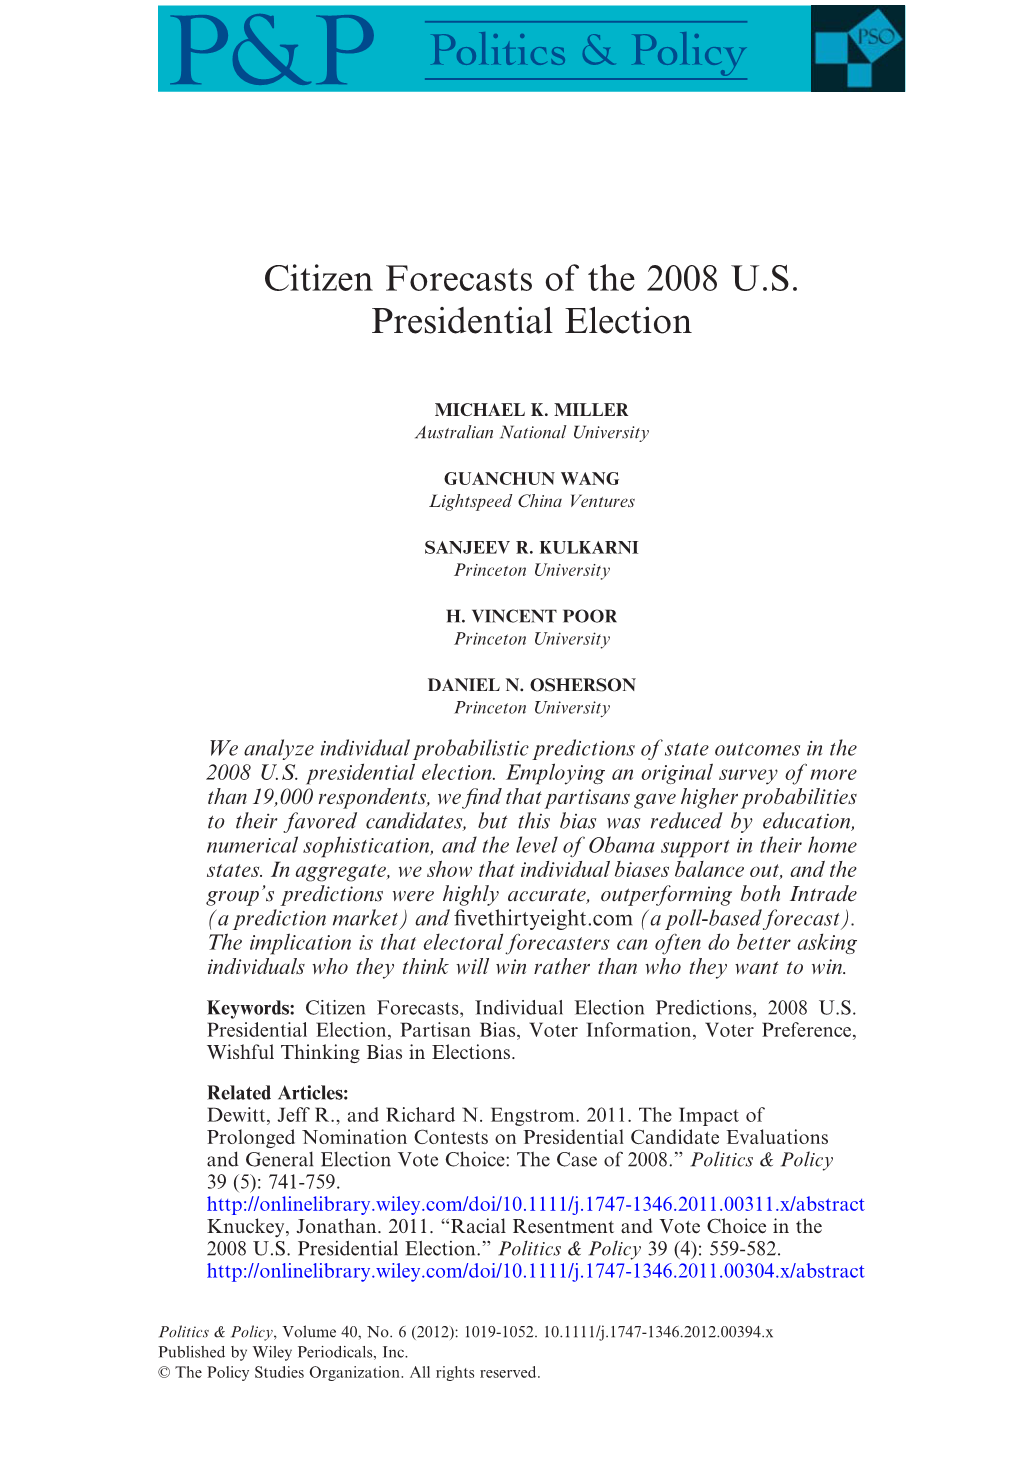 Citizen Forecasts of the 2008 U.S. Presidential Election